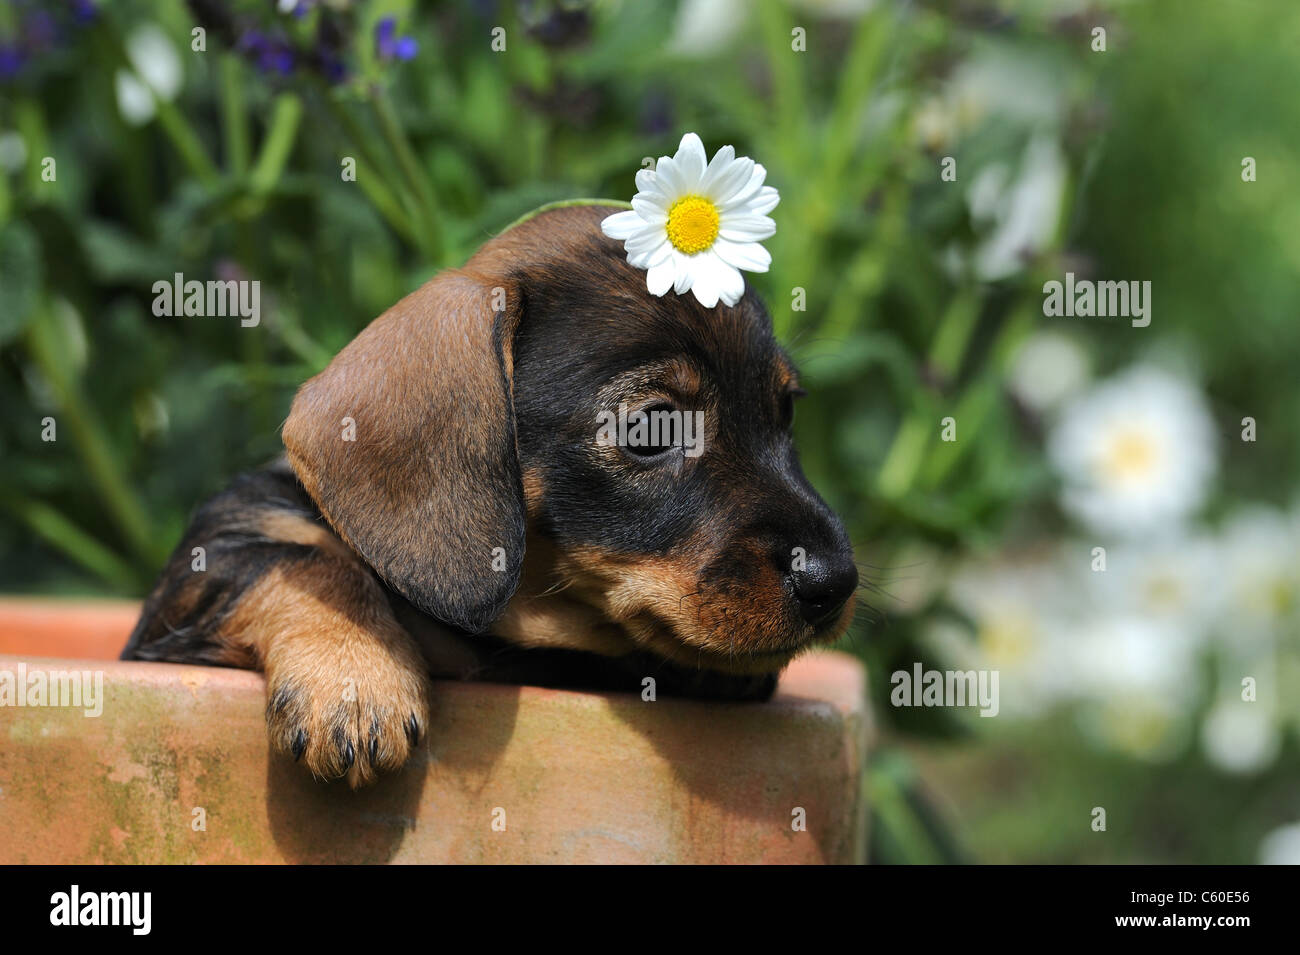 Wire-haired Dachshund (Canis lupus familiaris). Puppy with a Oxeye Daisy flower on its head looking out from a terracotta pot. Stock Photo